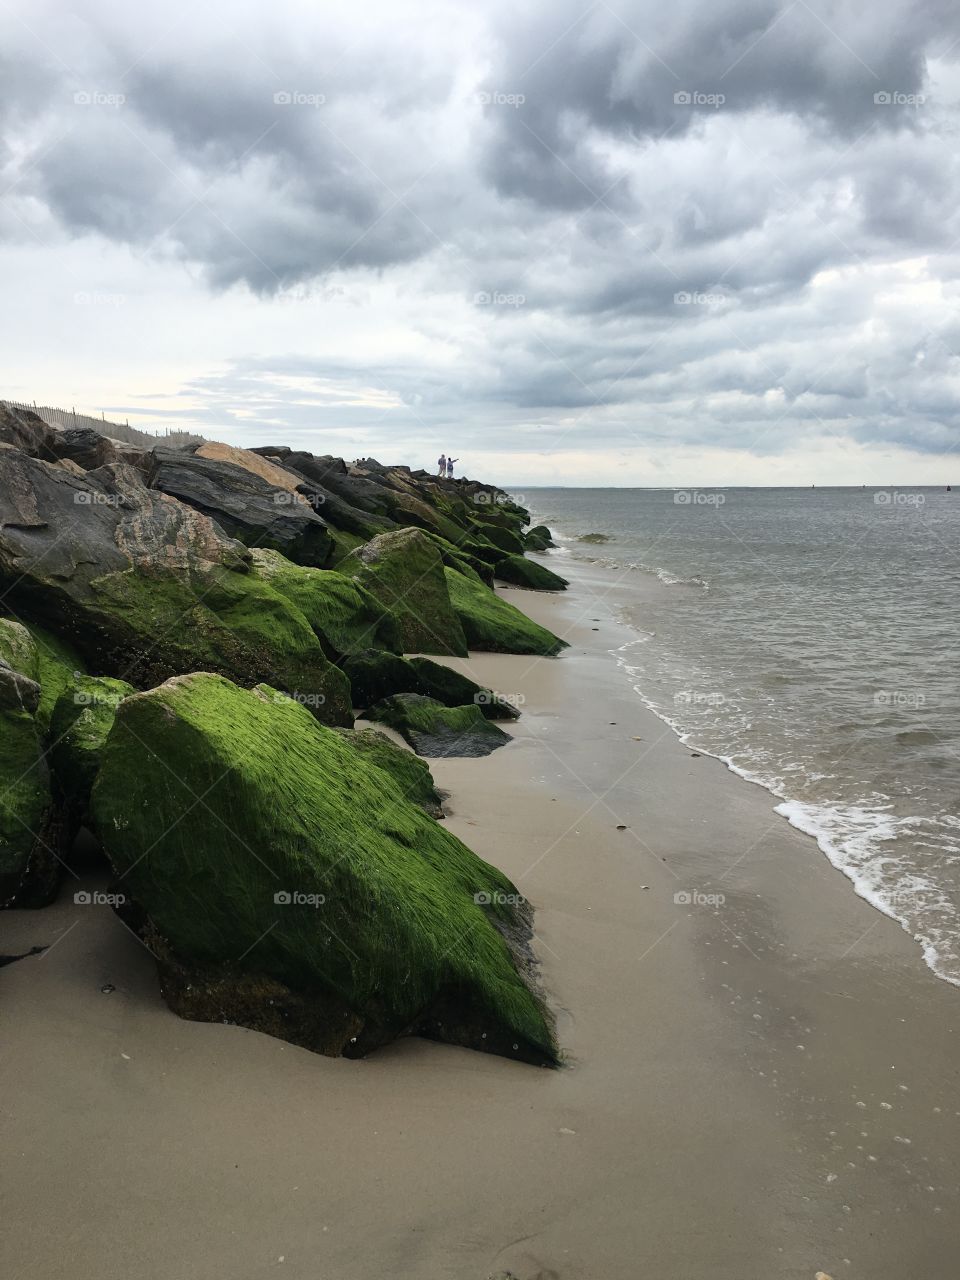 Moss on the jetty as a storm rolls in